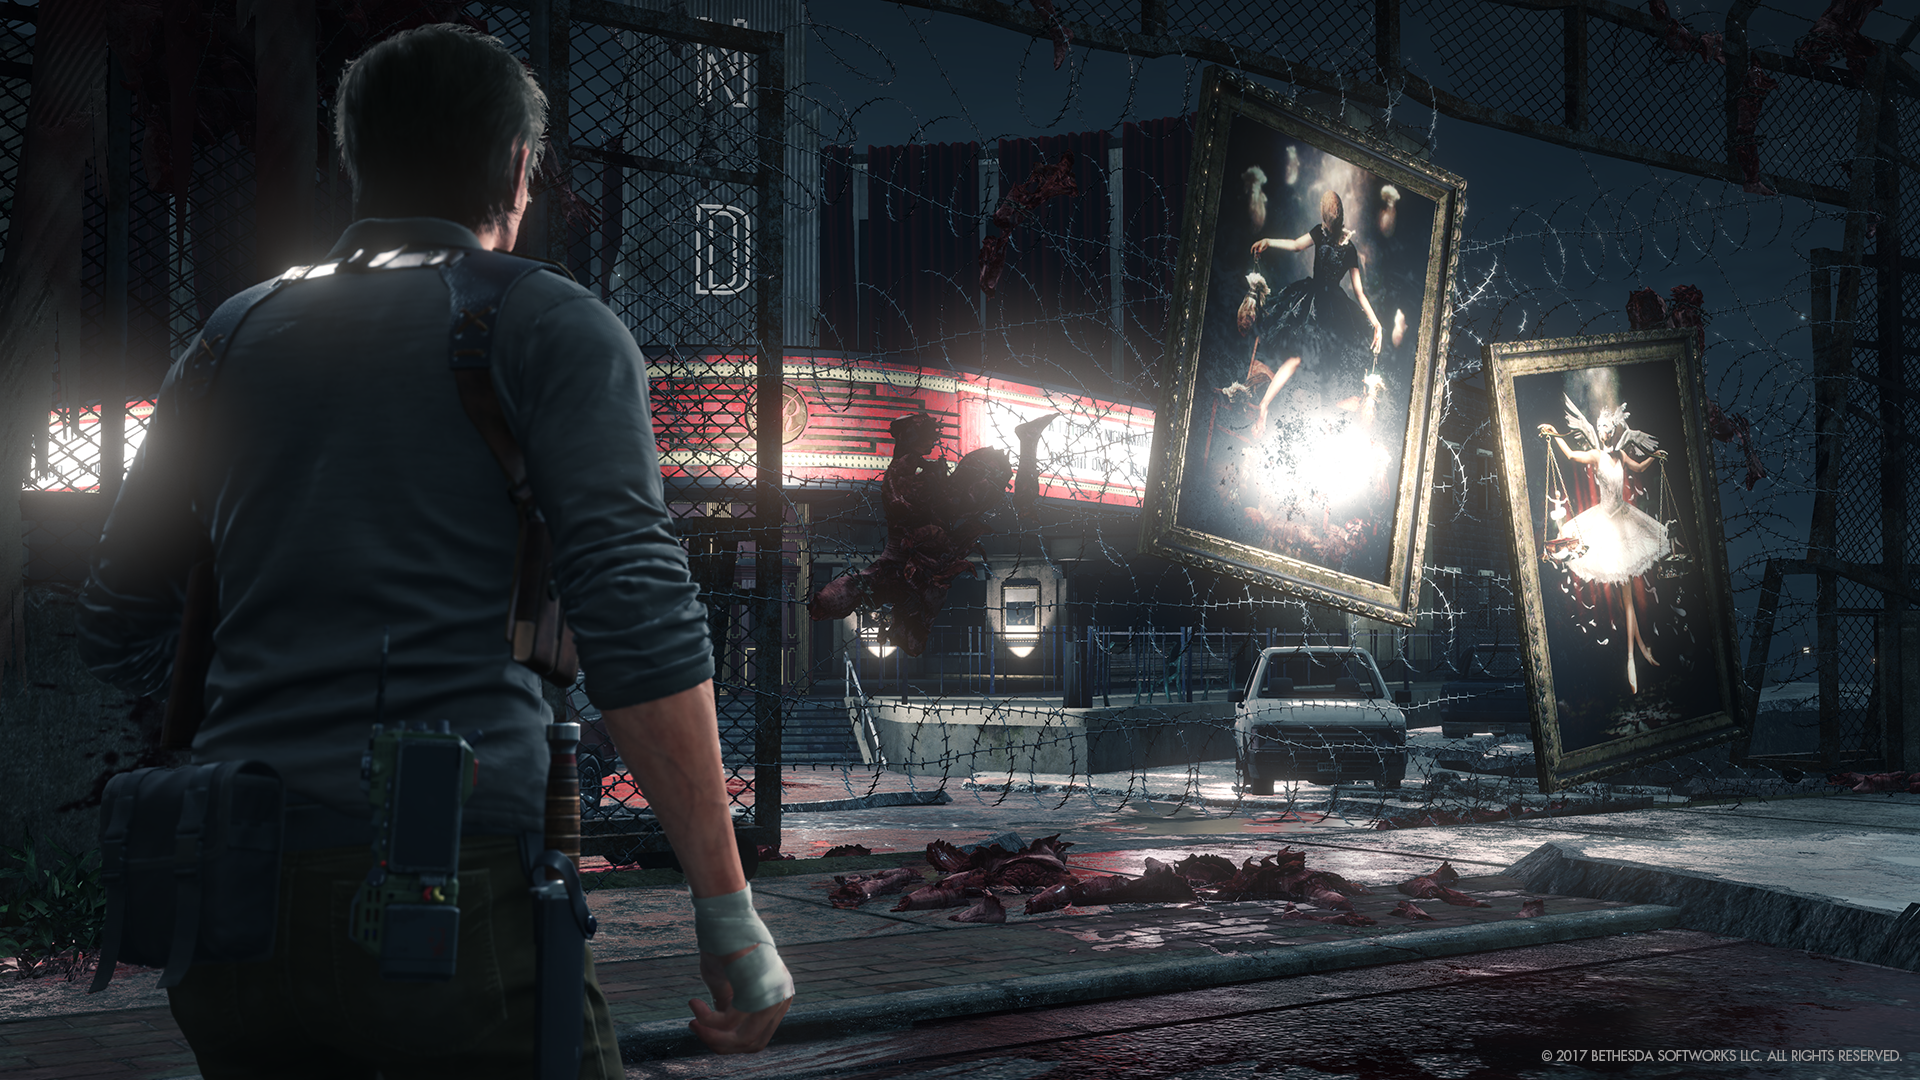 Media asset in full size related to 3dfxzone.it news item entitled as follows: Bethesda aggiunge la modlit di gioco in prima persona al game The Evil Within 2 | Image Name: news27879_The-Evil-Within-2-Screenshot_4.png